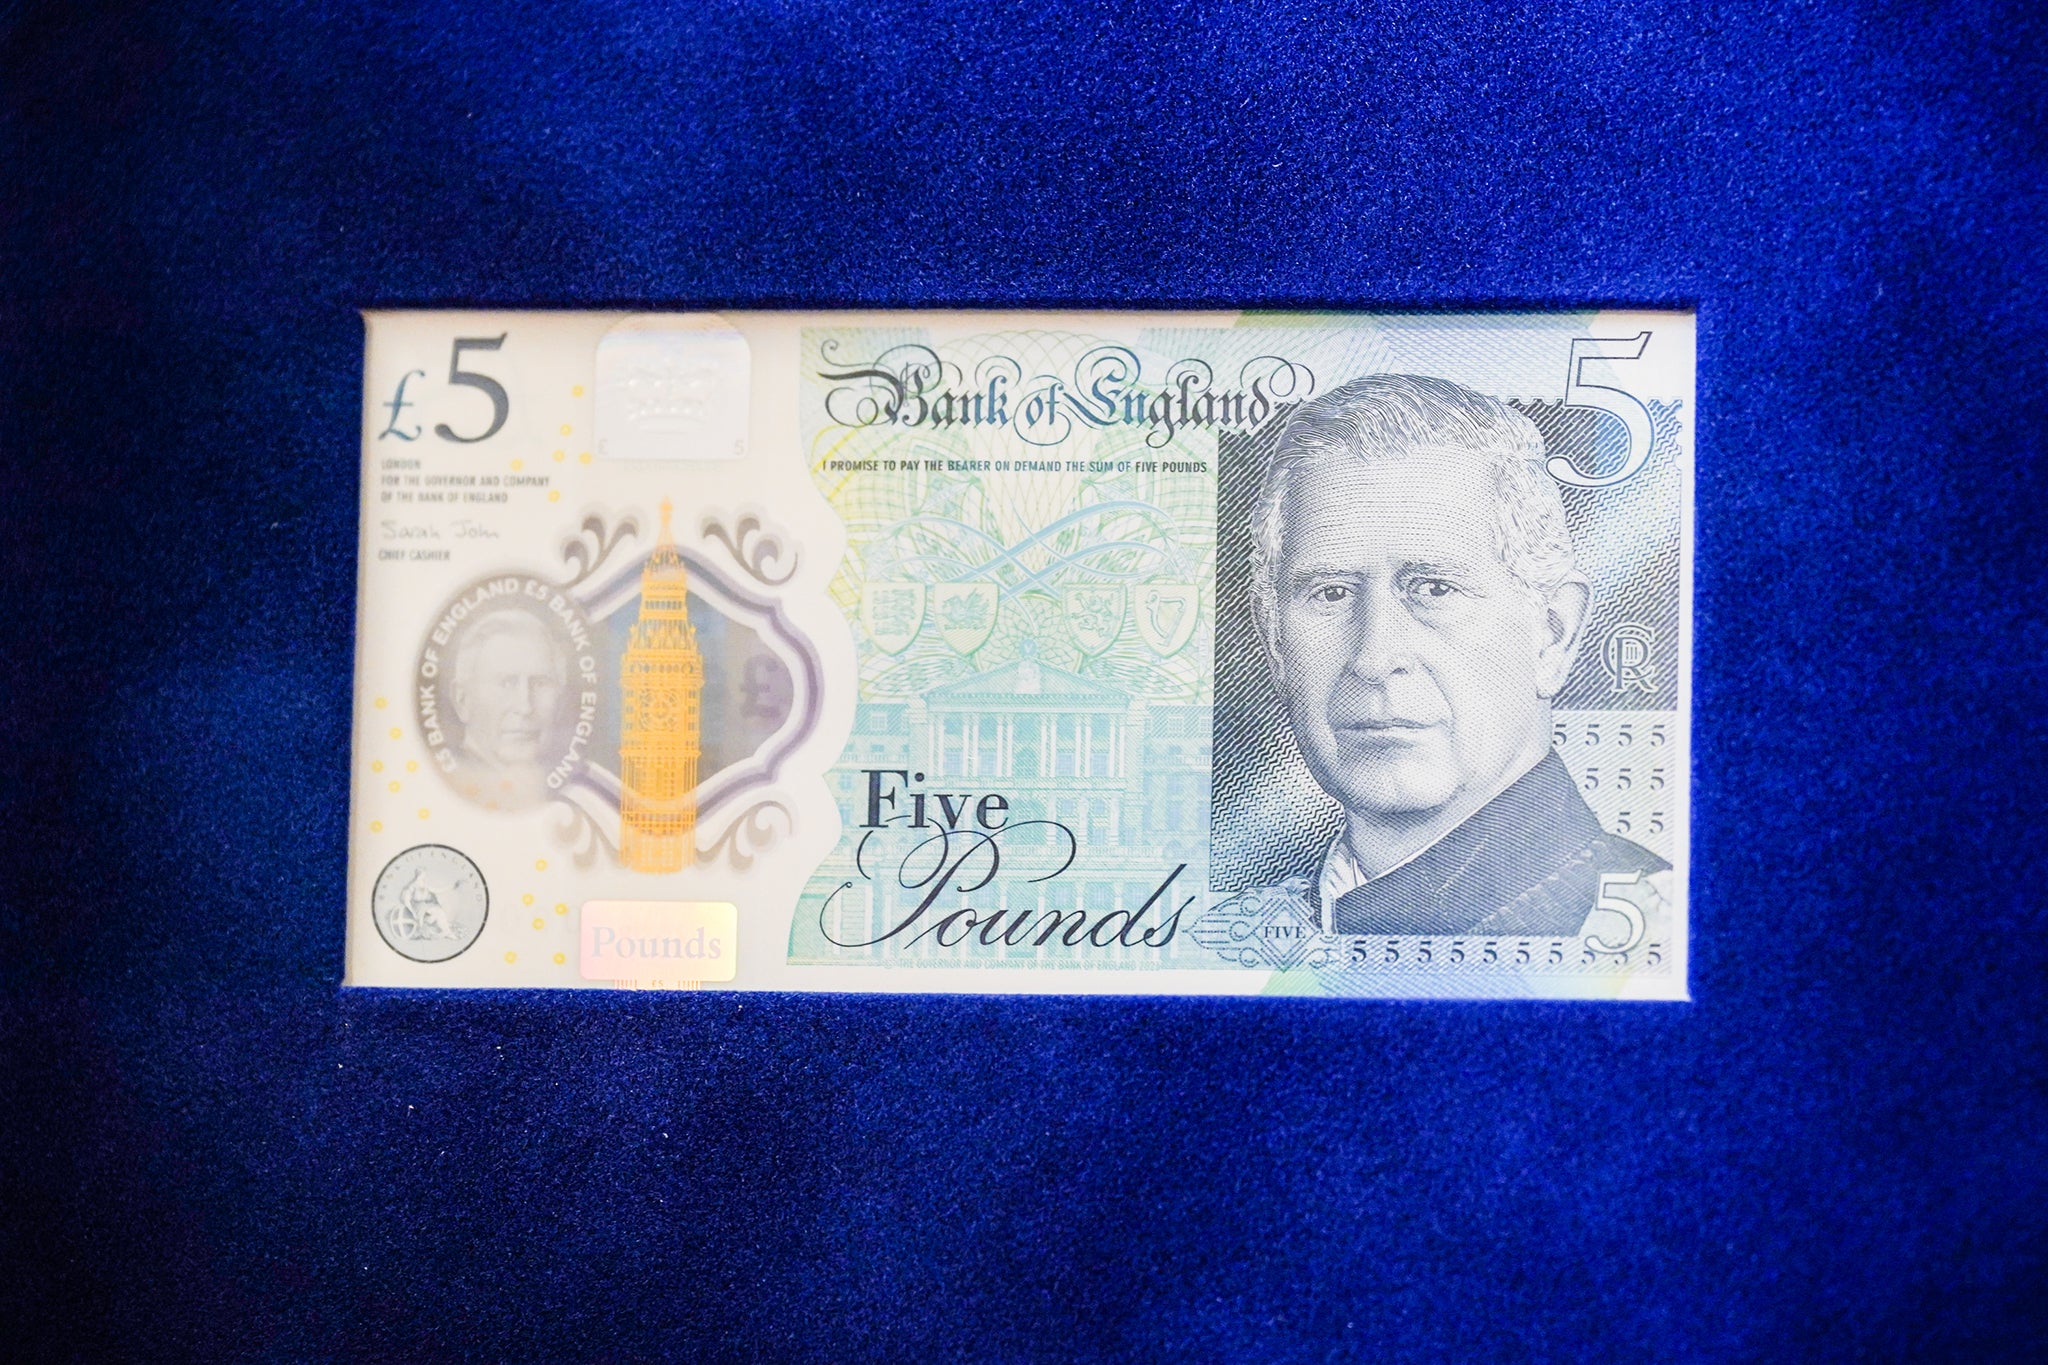 The new £5 note